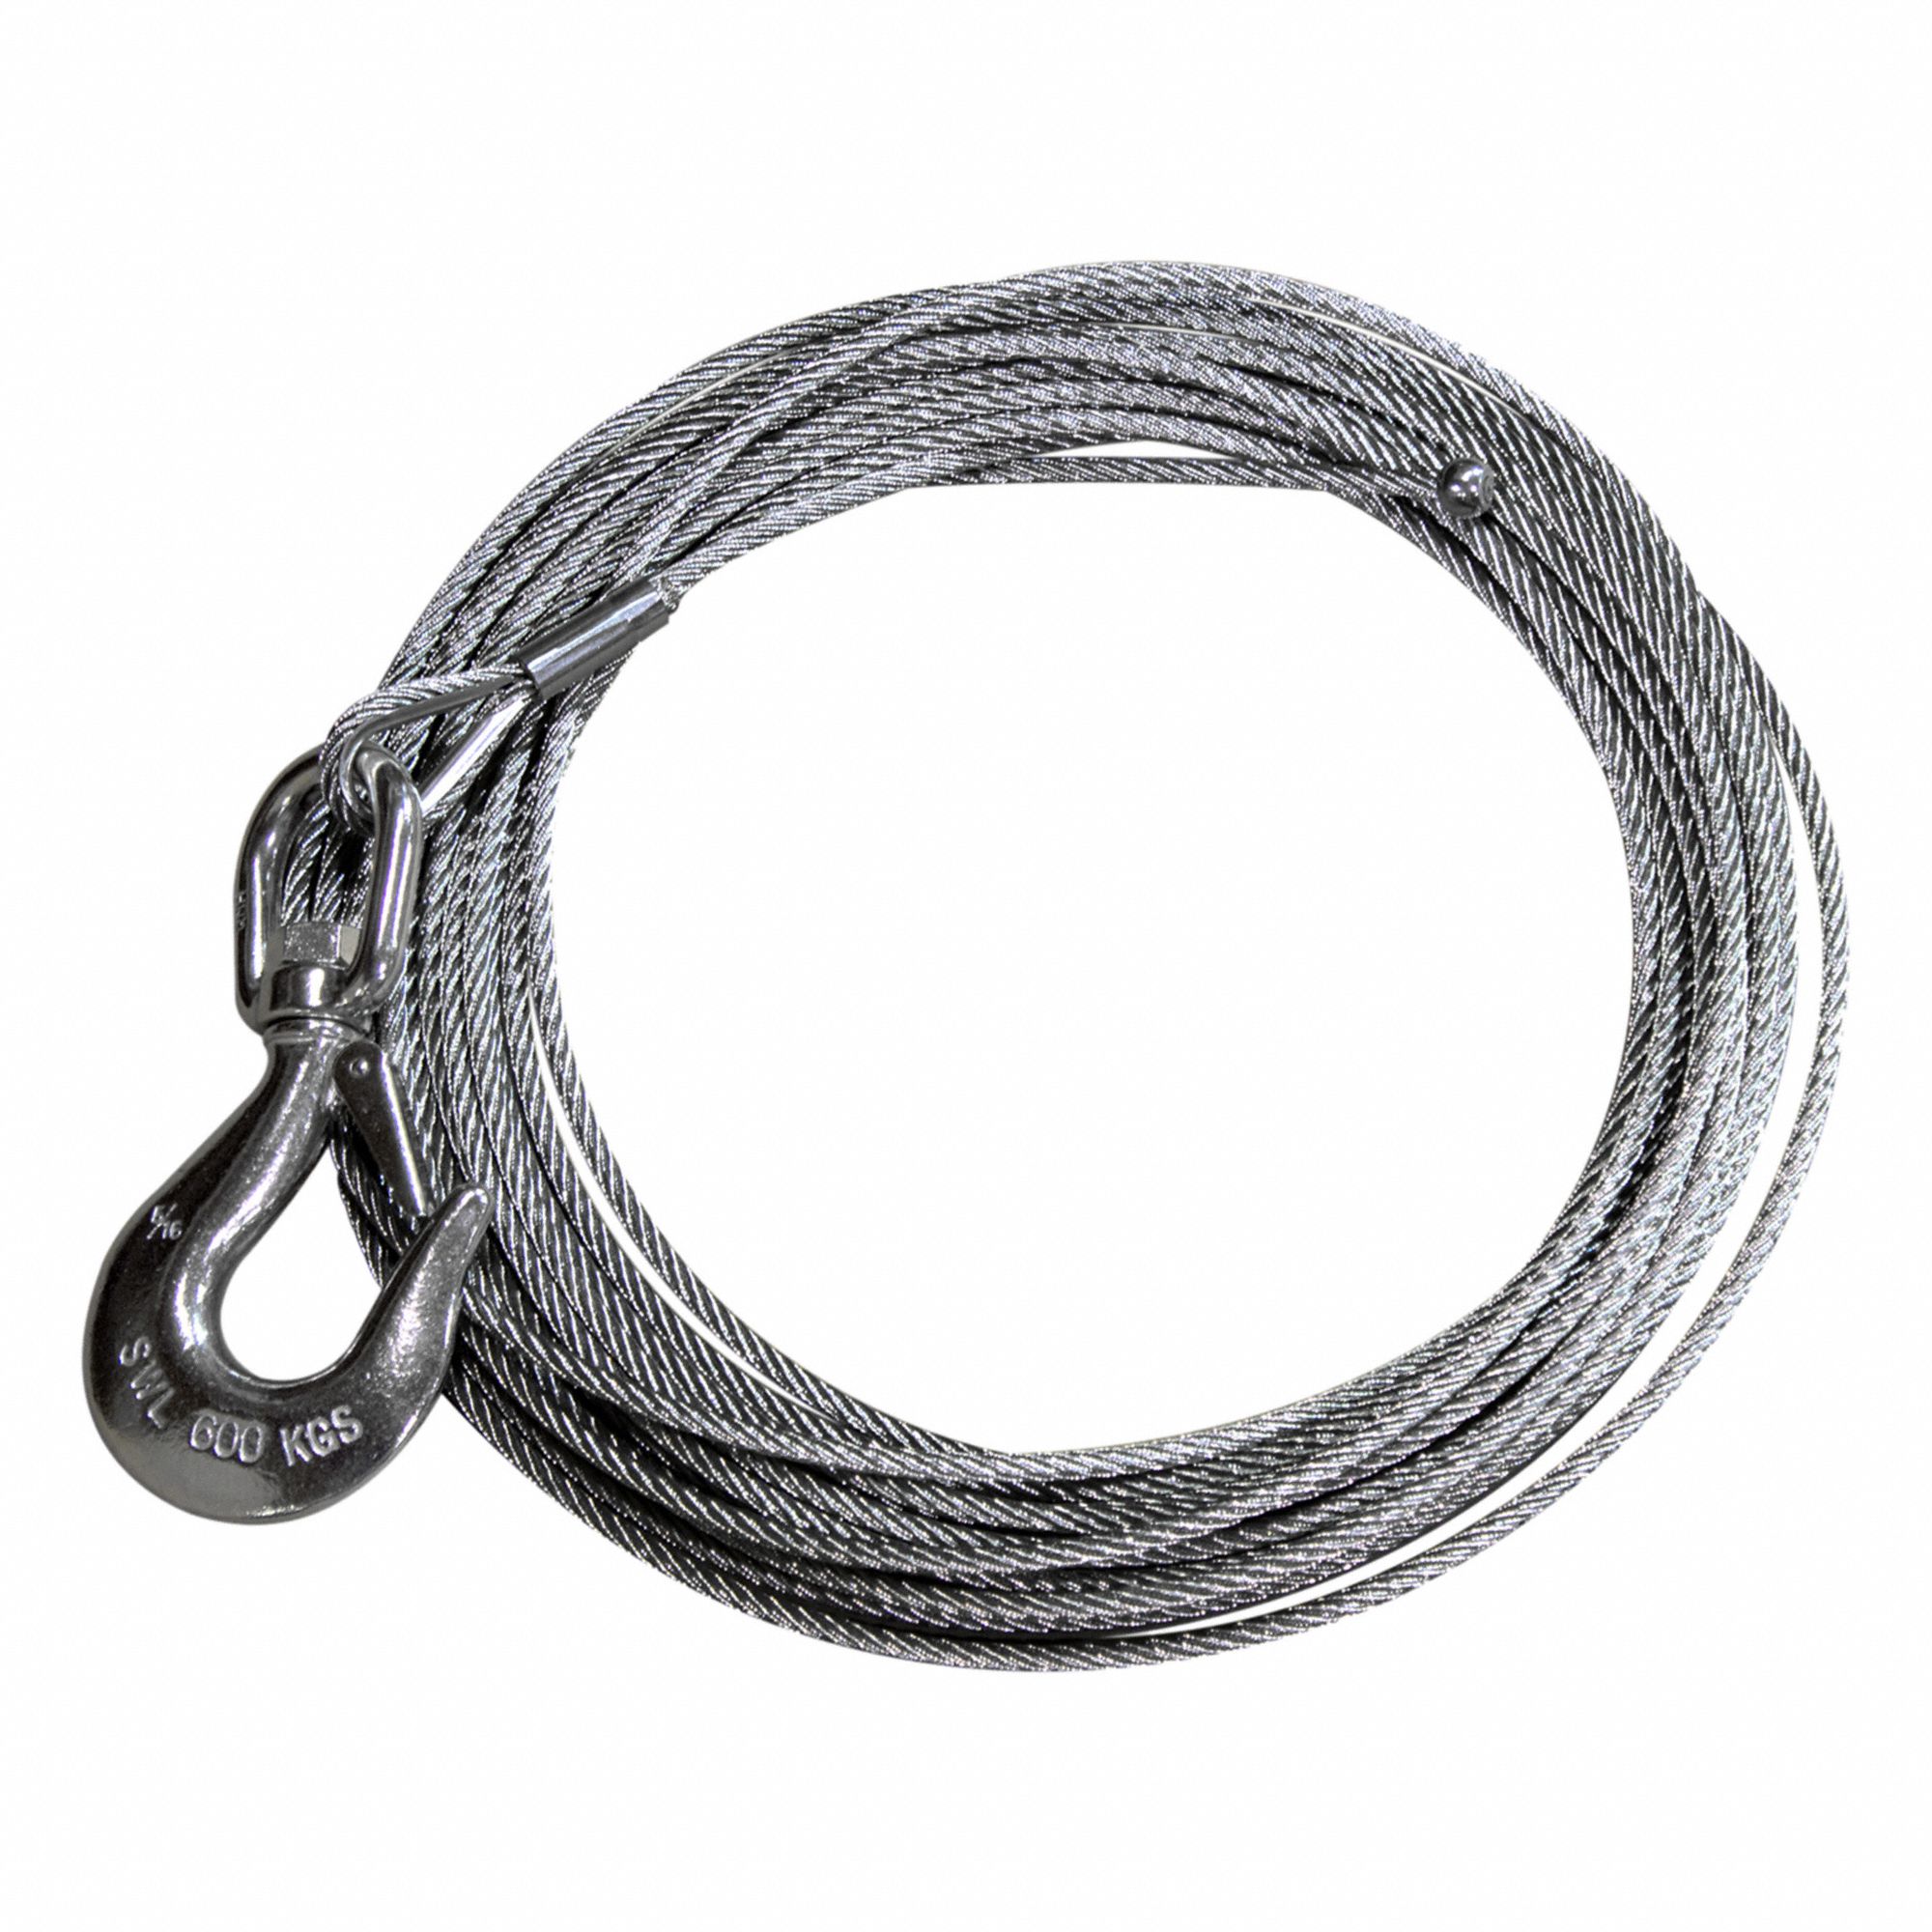 THERN ROPE,SS W/HOOK,20 FT X 1/4 IN - Winch Cables, Lines and